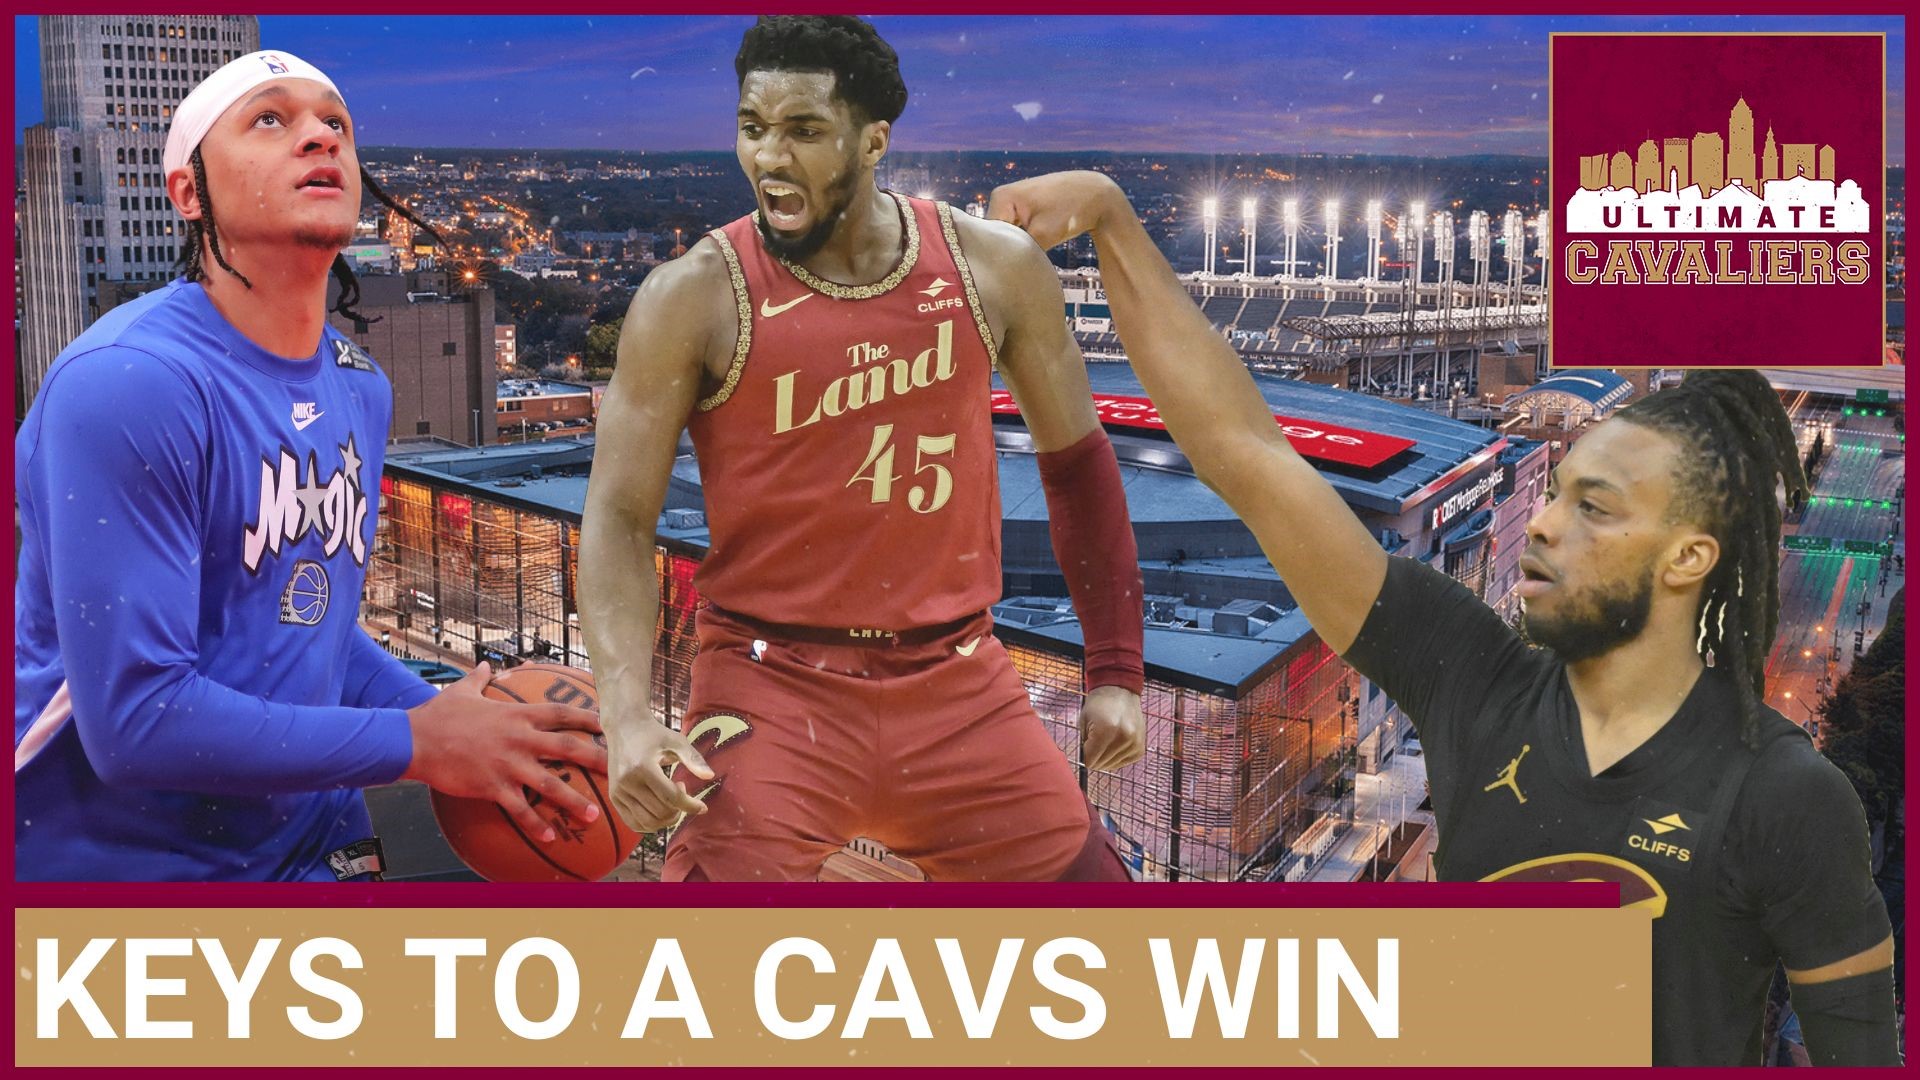 If the Cavs are going to beat the Magic, here's what needs to happen.